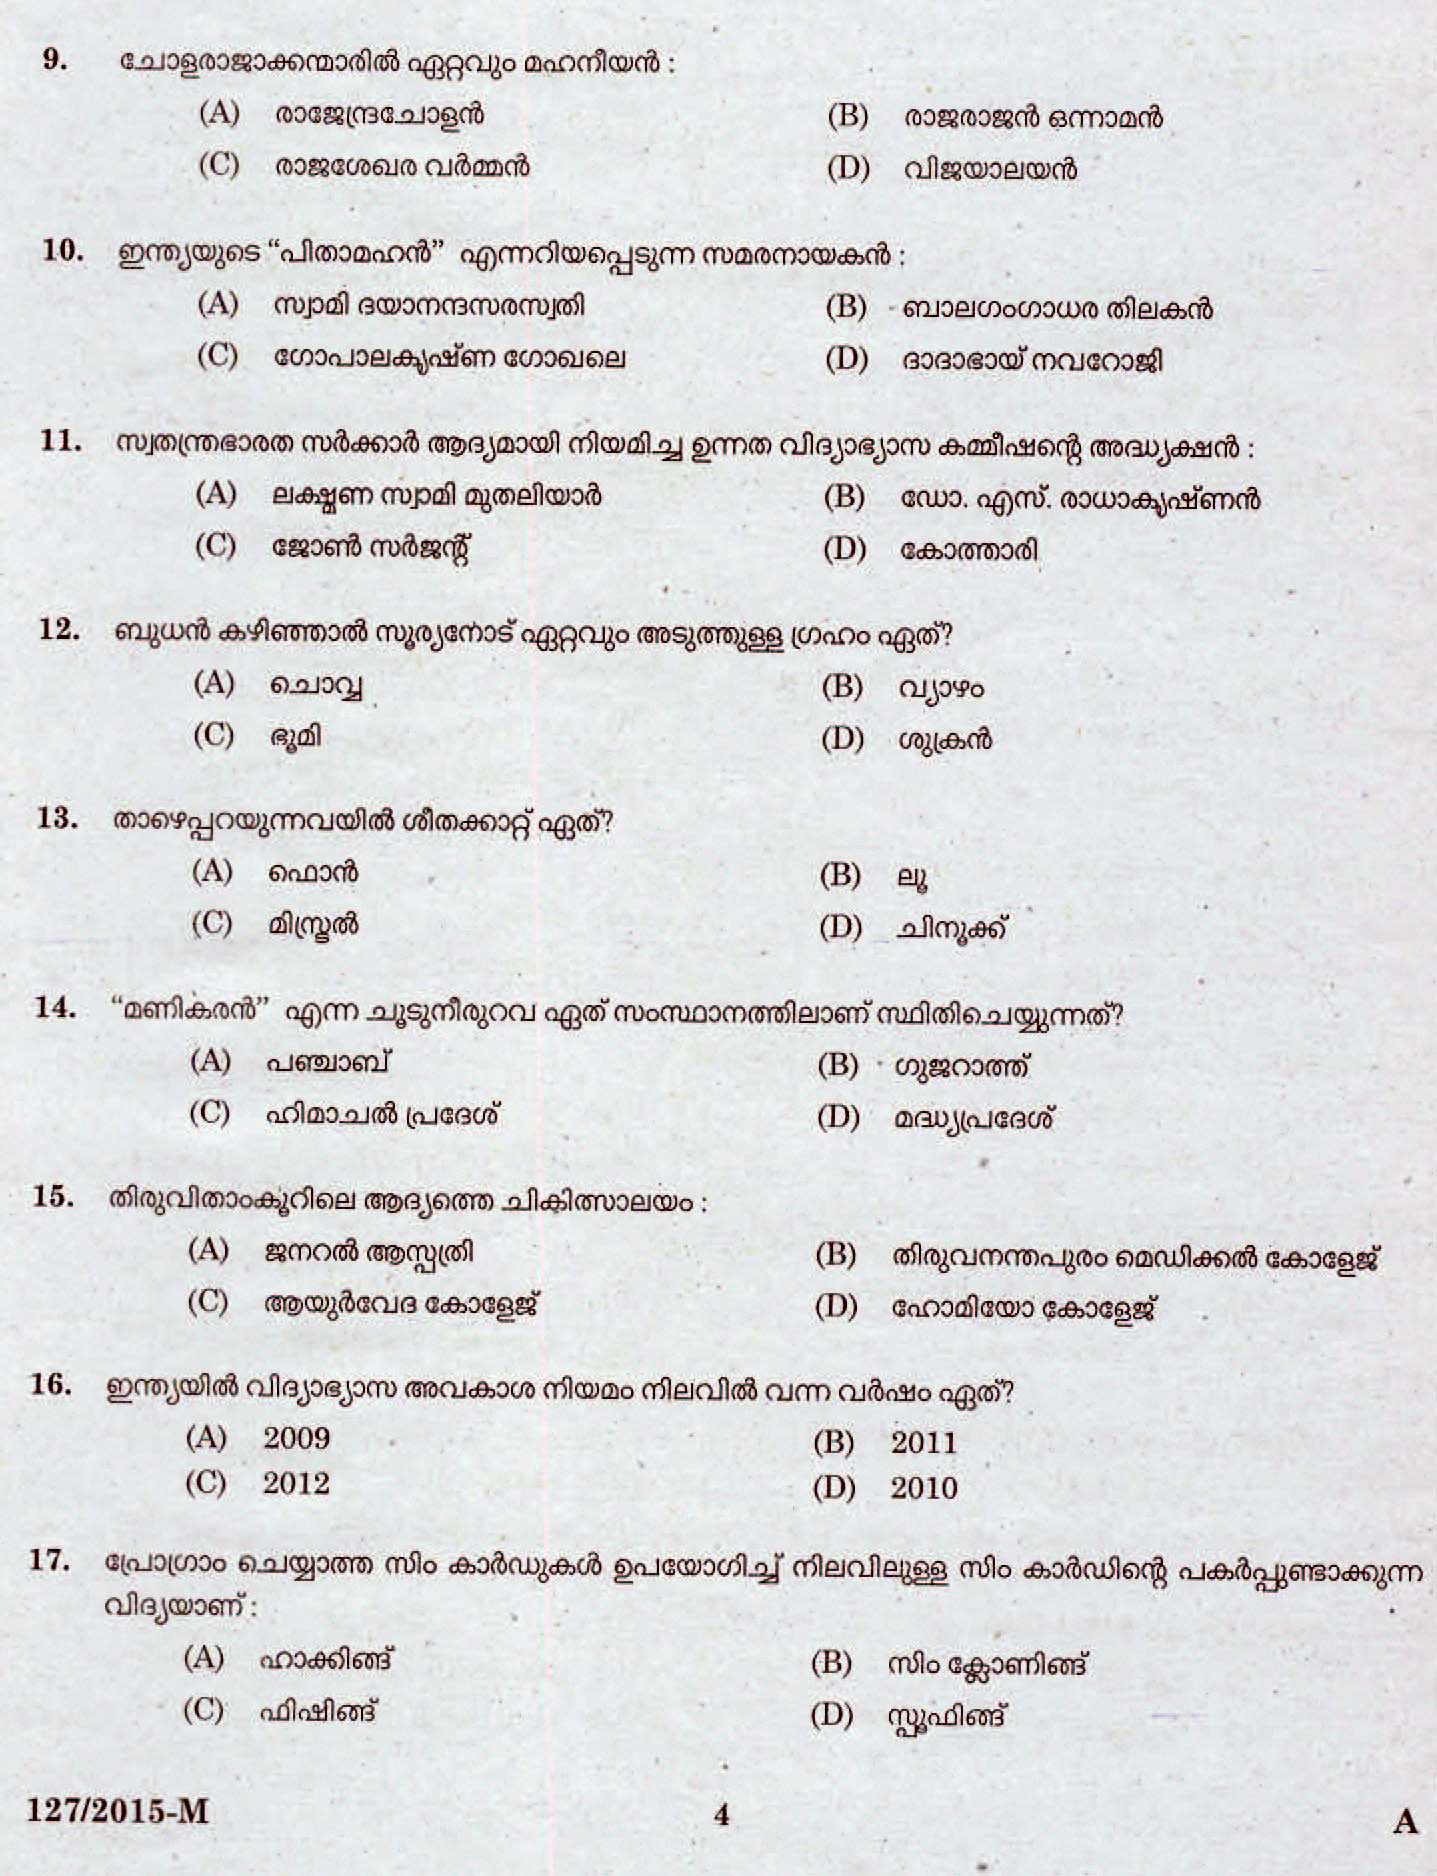 LD Clerk Bill Collector Various Question Paper Malayalam 2015 Paper Code 1272015 M 2